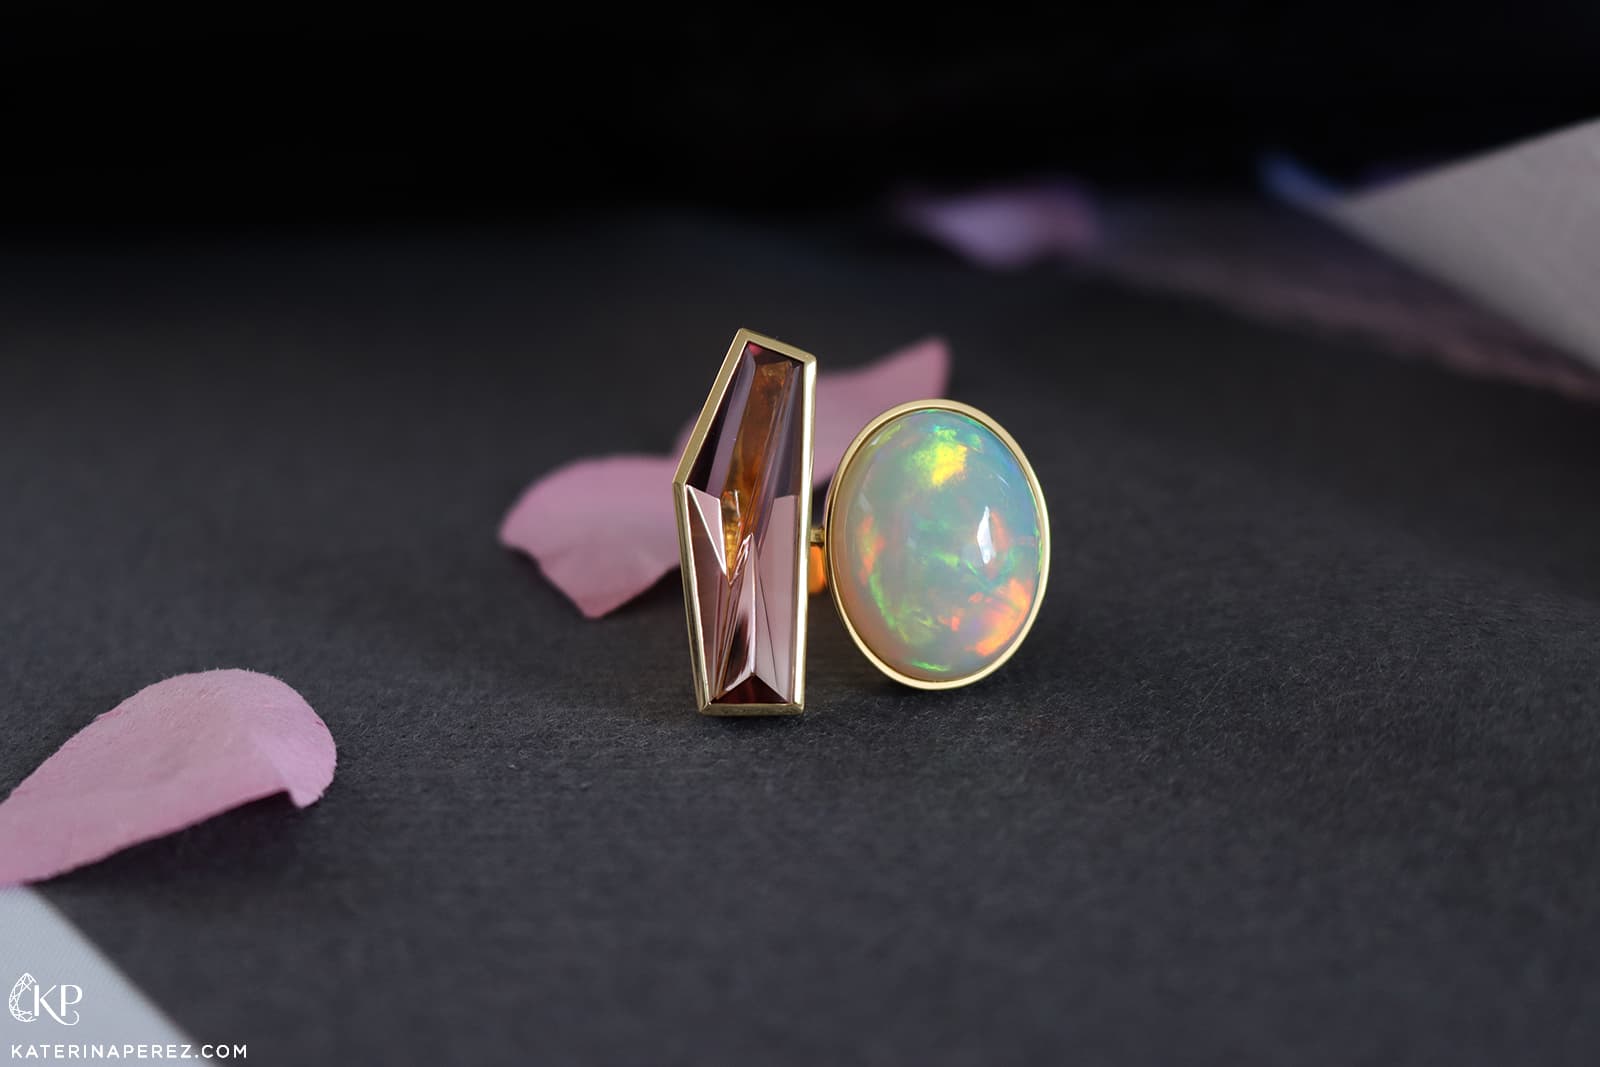 Atelier Munsteiner ring with a white opal and fancy-cut morganite gemstone